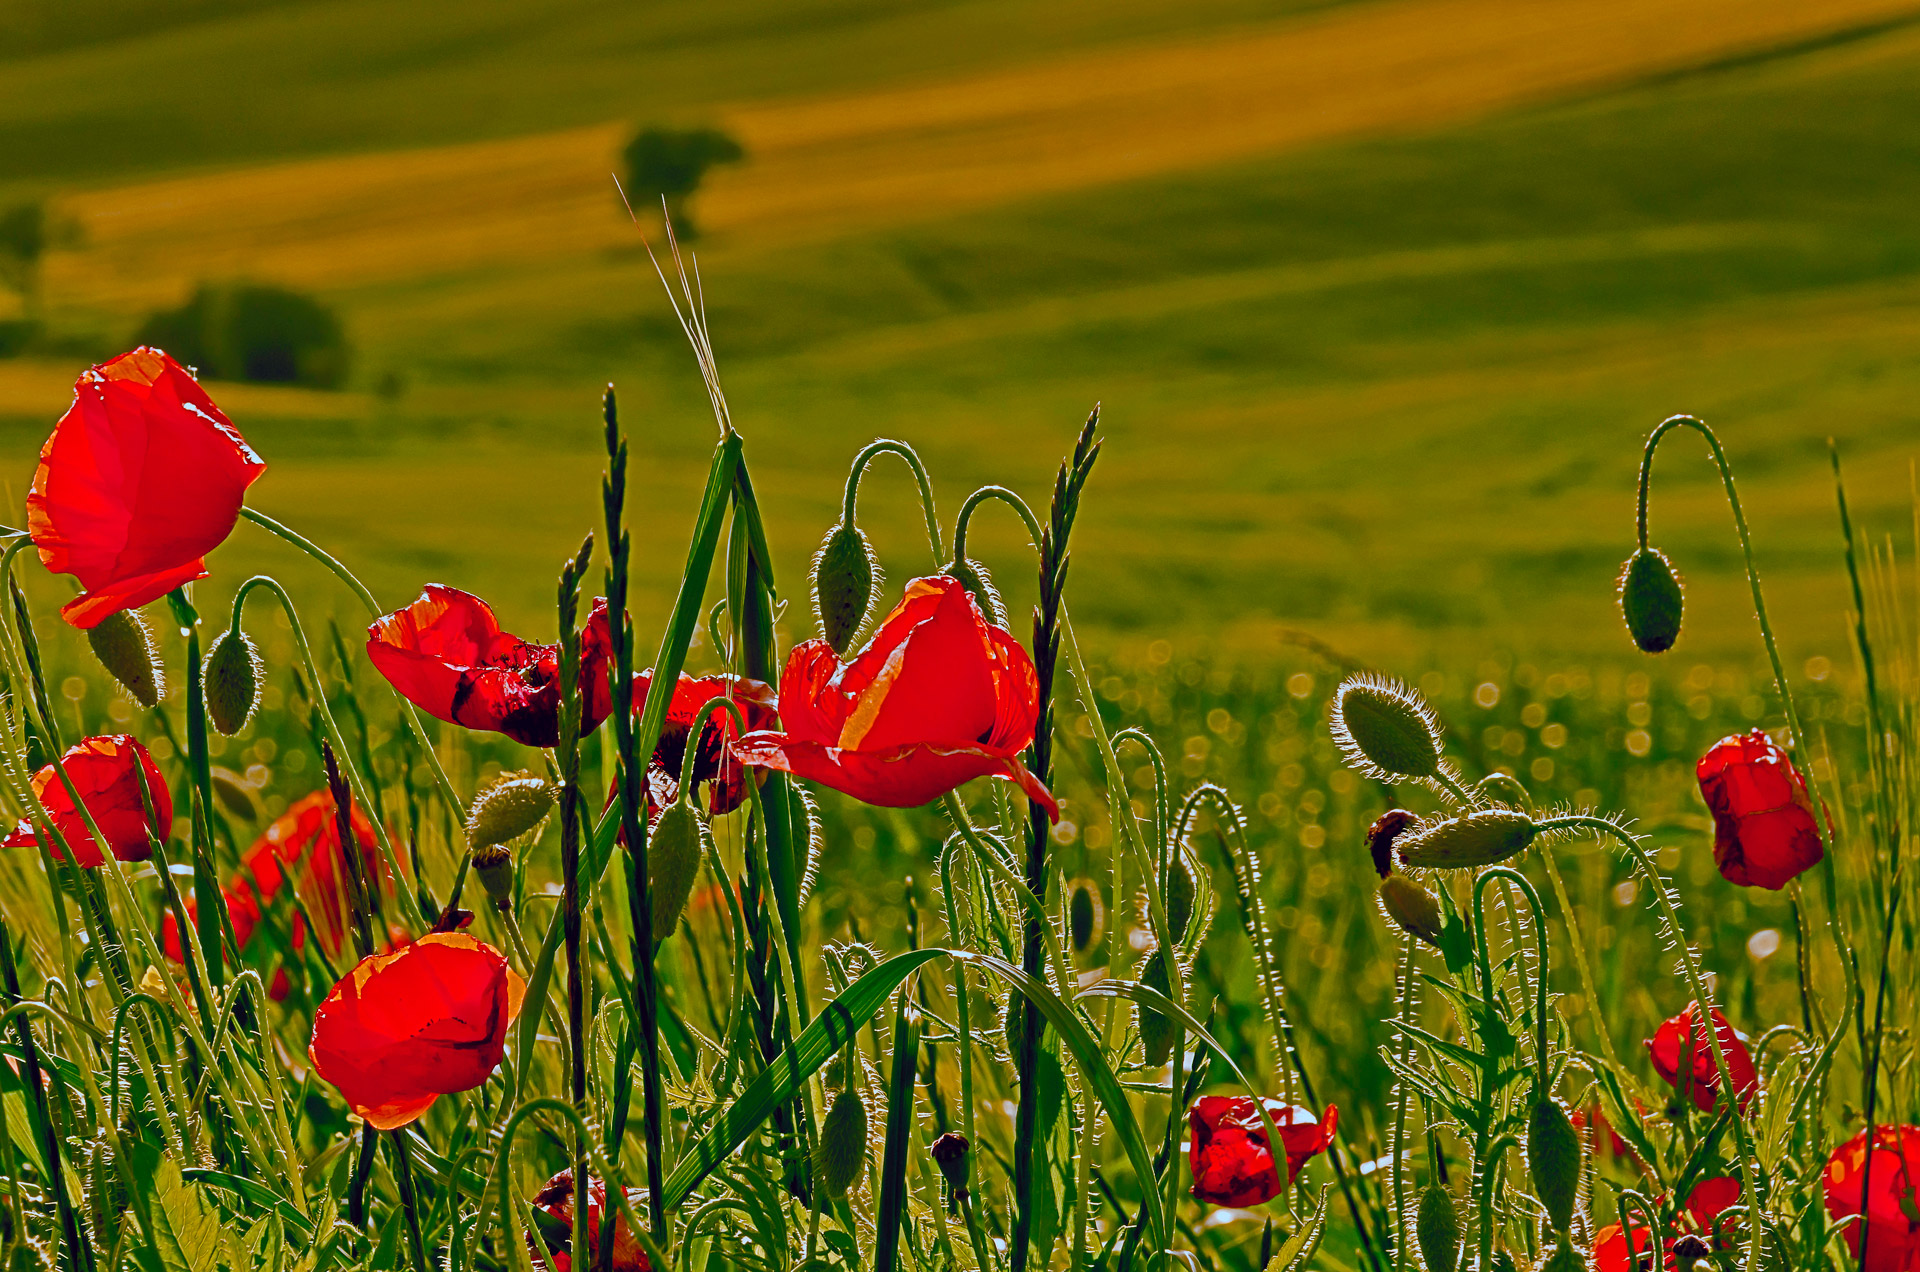 Poppies Free Photo Download | FreeImages